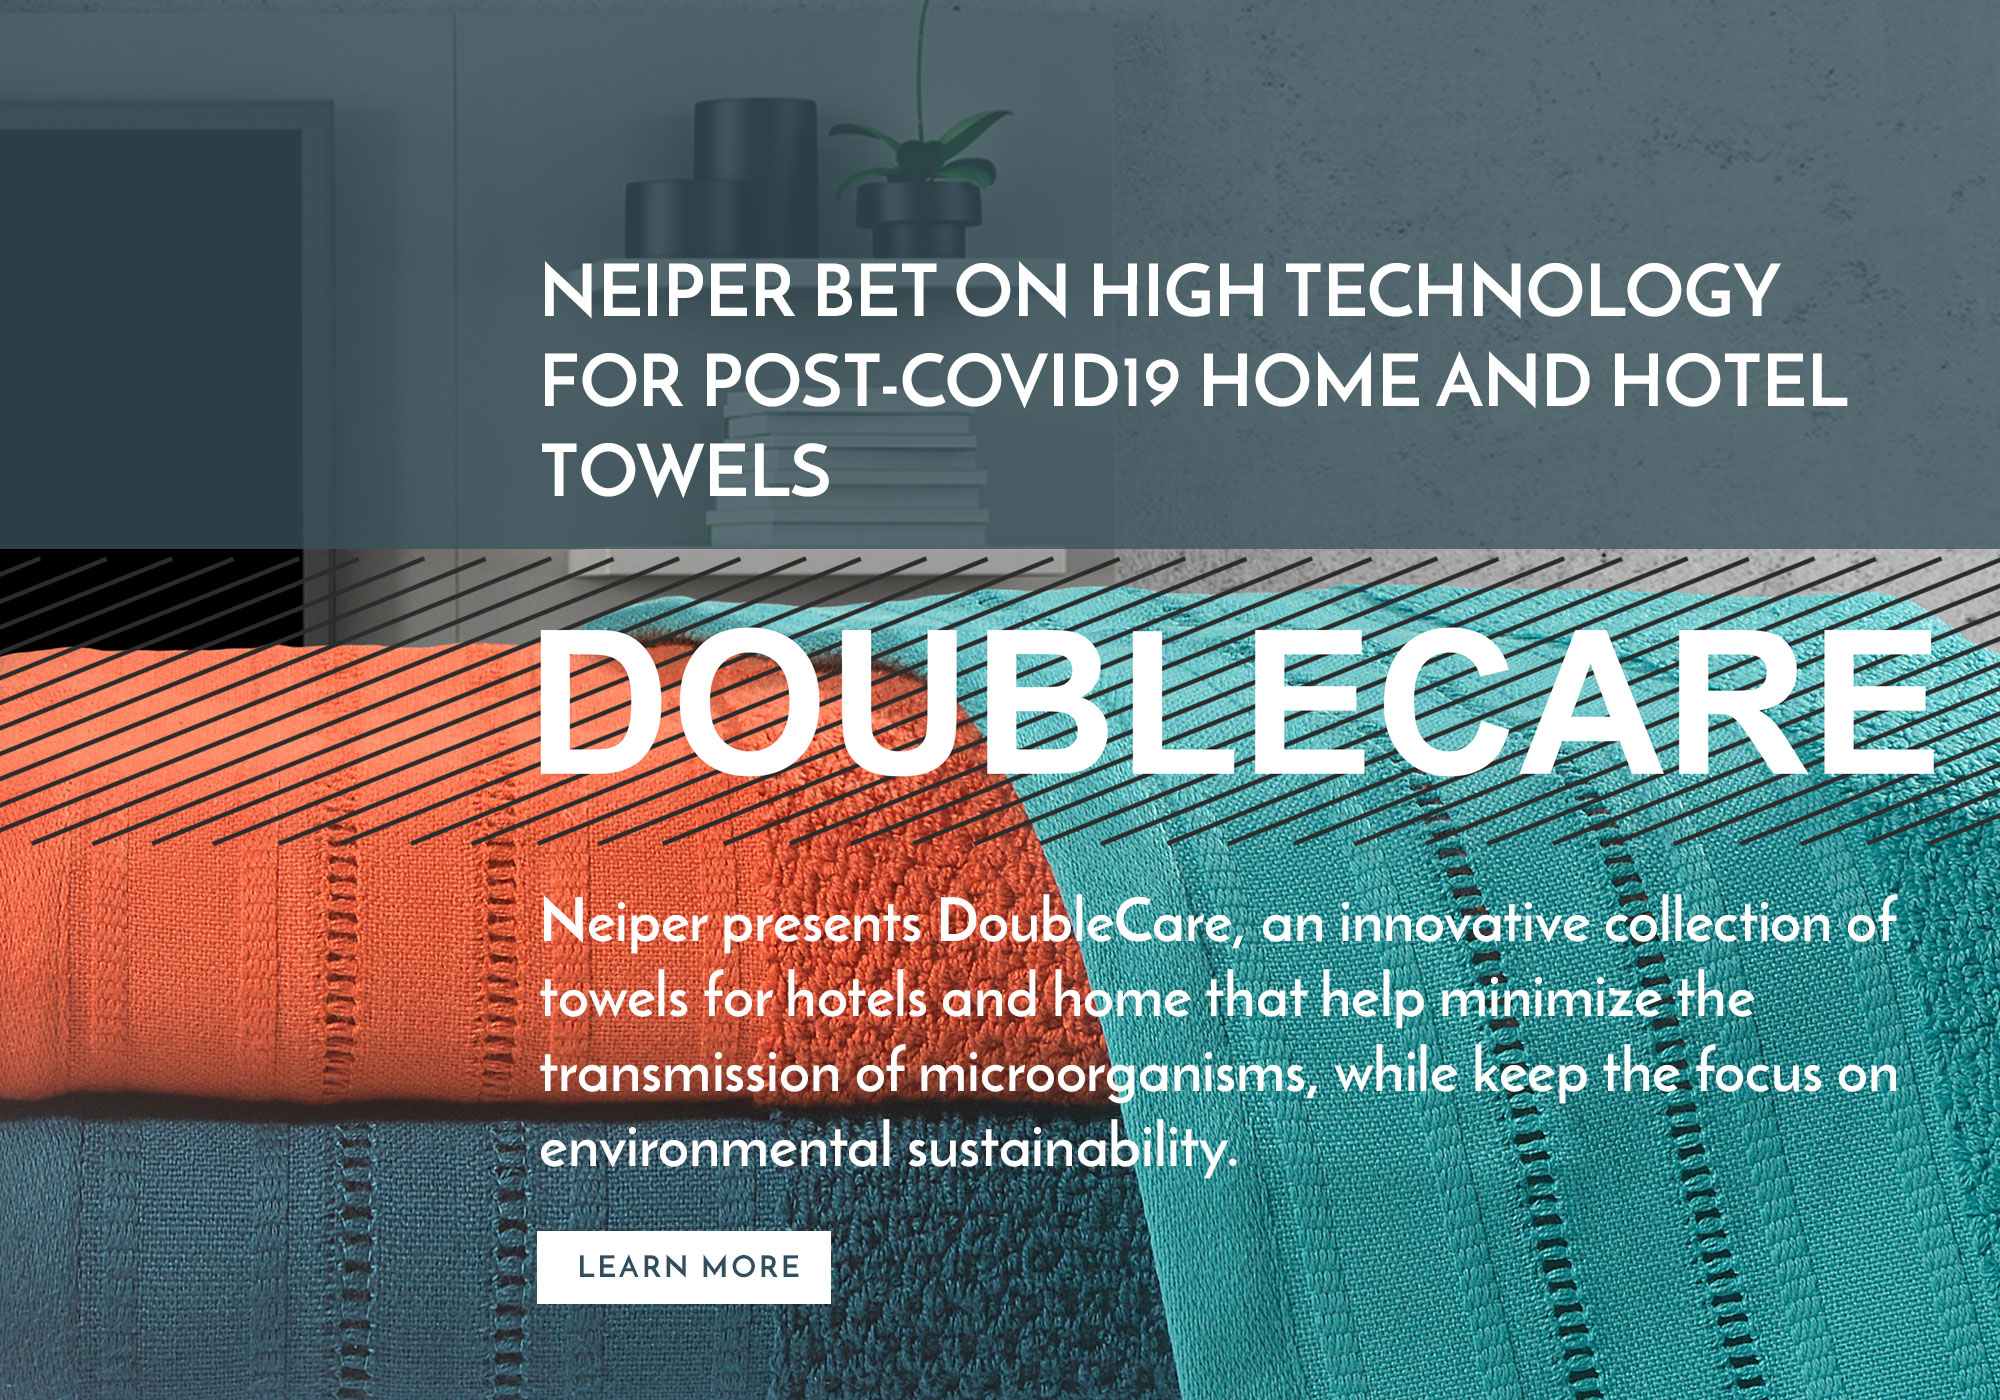 Neiper bets on high tech for post-Covid19 home and hotel towels